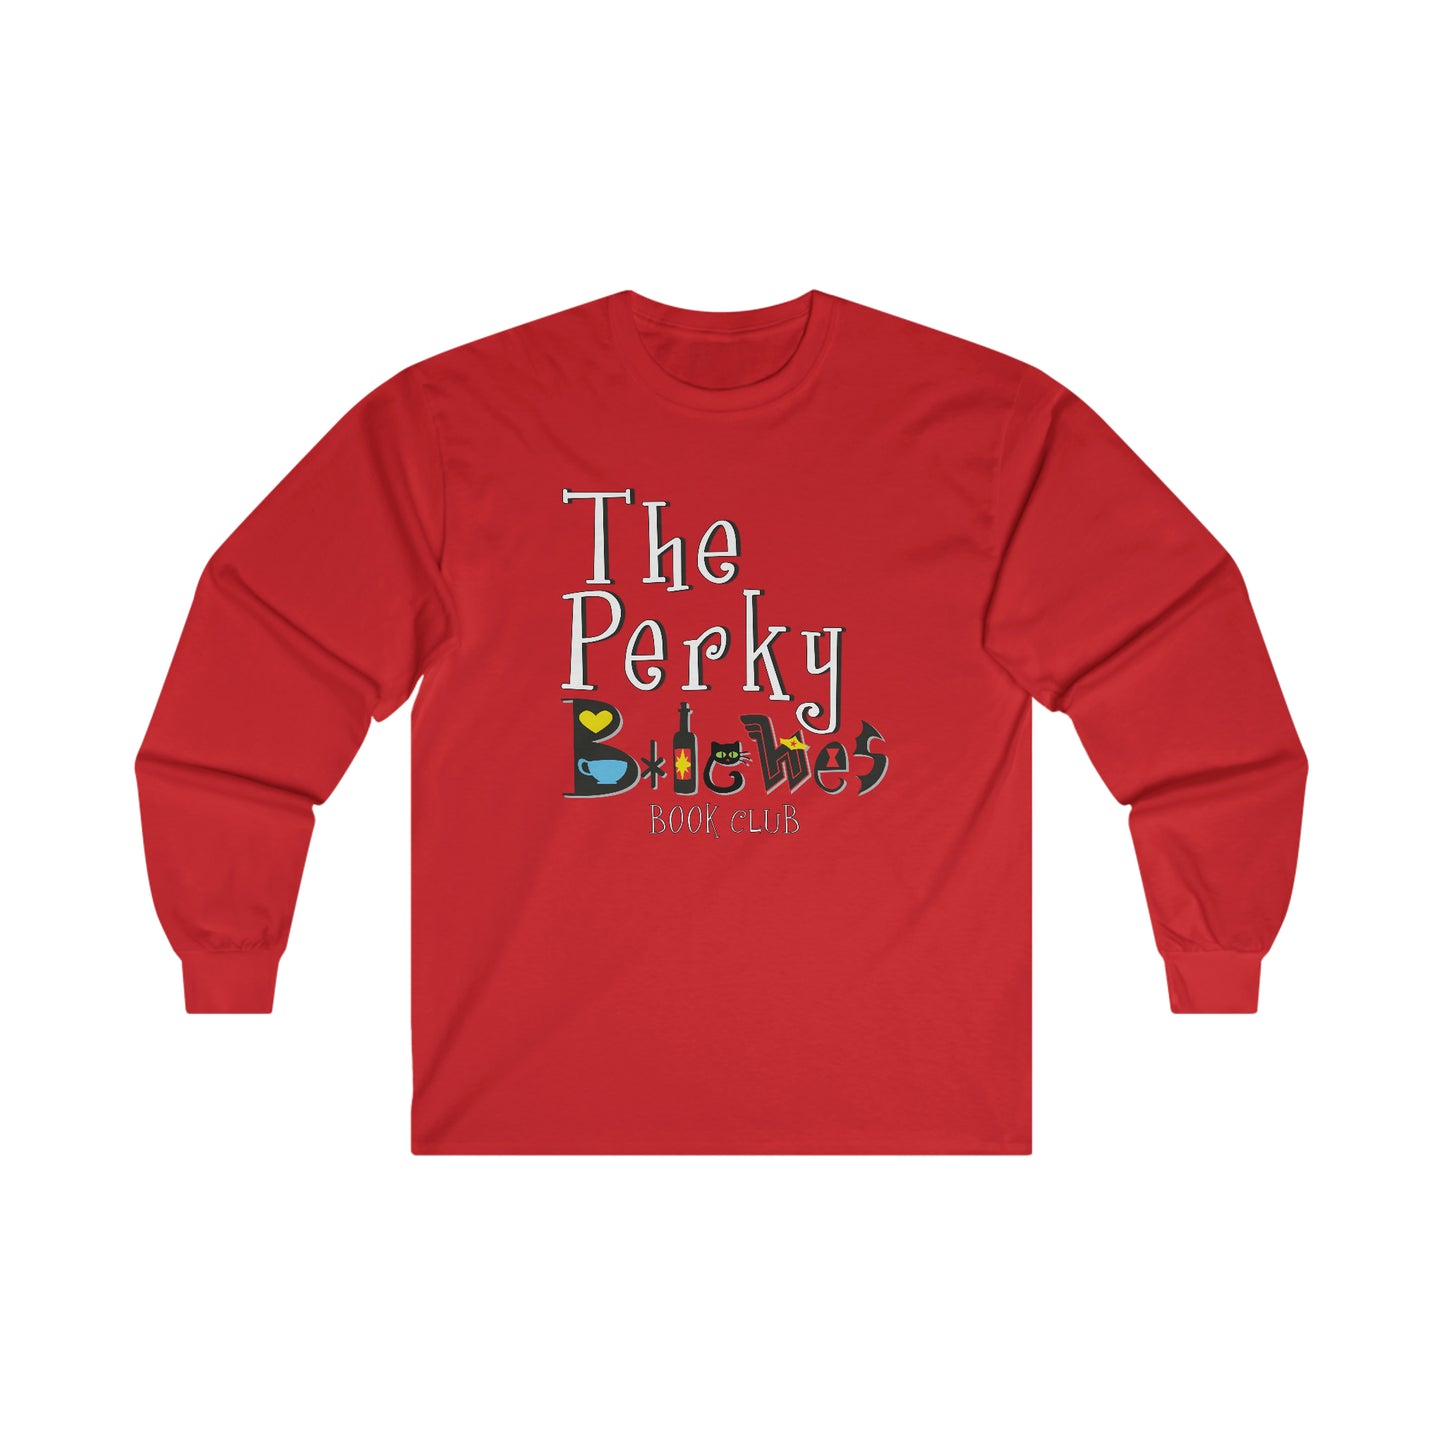 The Perky B*tches NEW STACKED LOGO Ultra Cotton Long Sleeve Tee